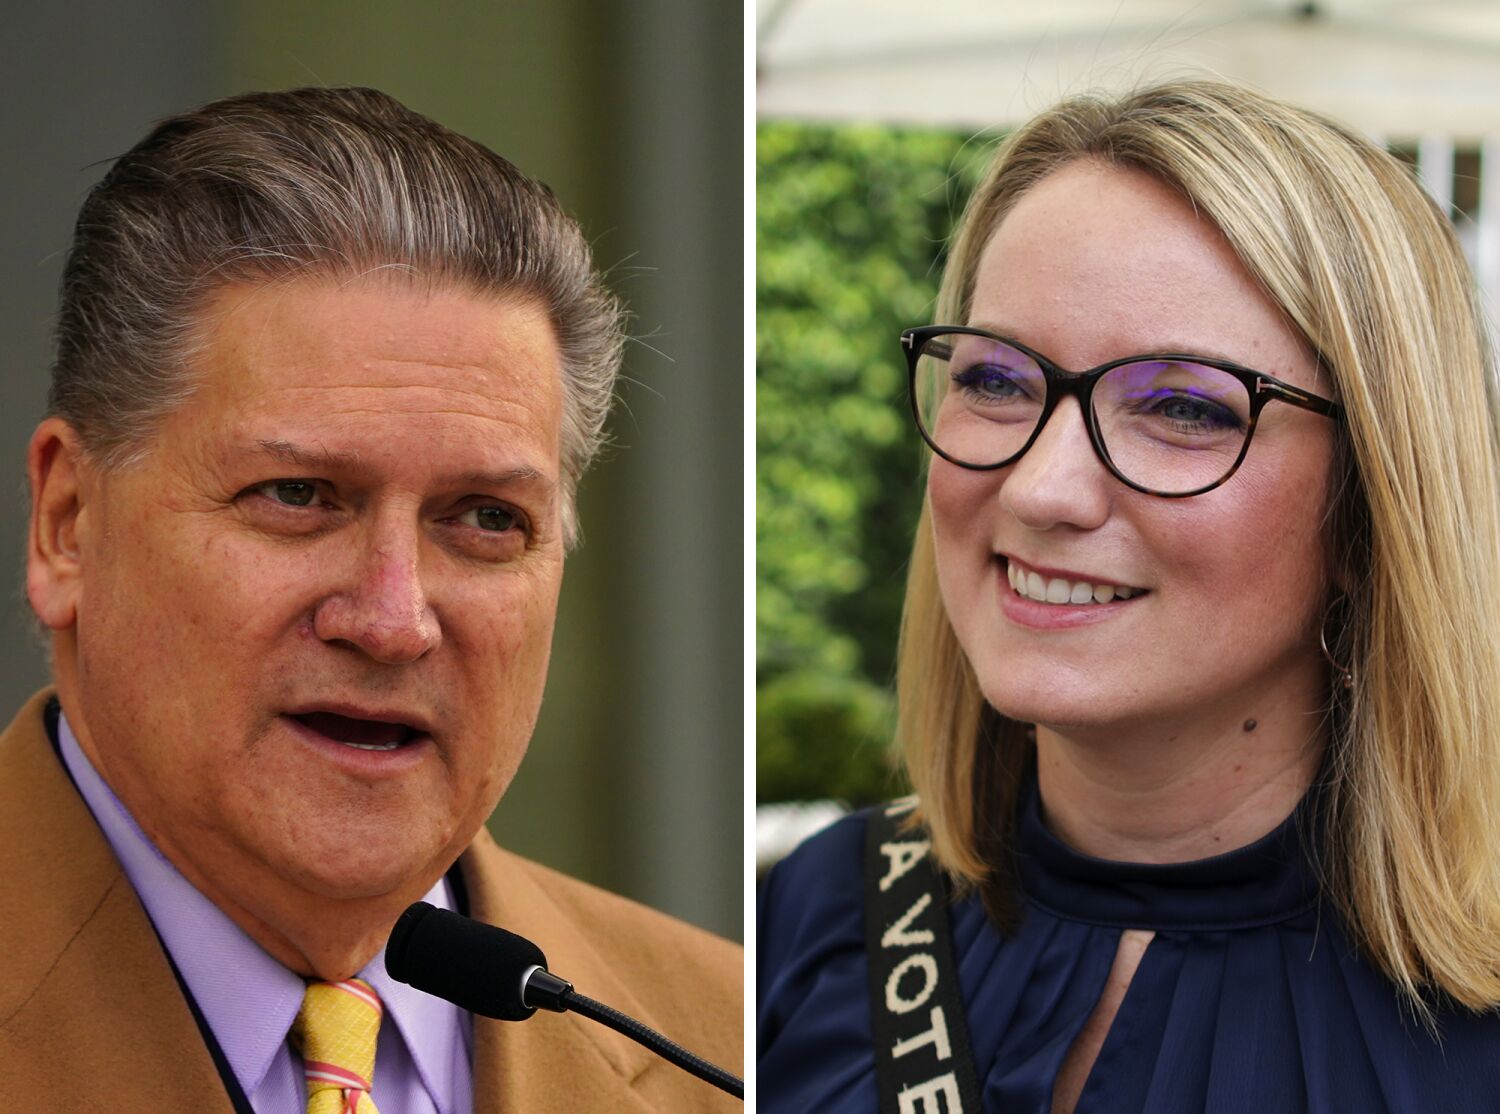 Guide to the L.A. County Supervisor District 3 race: Bob Hertzberg vs. Lindsey Horvath